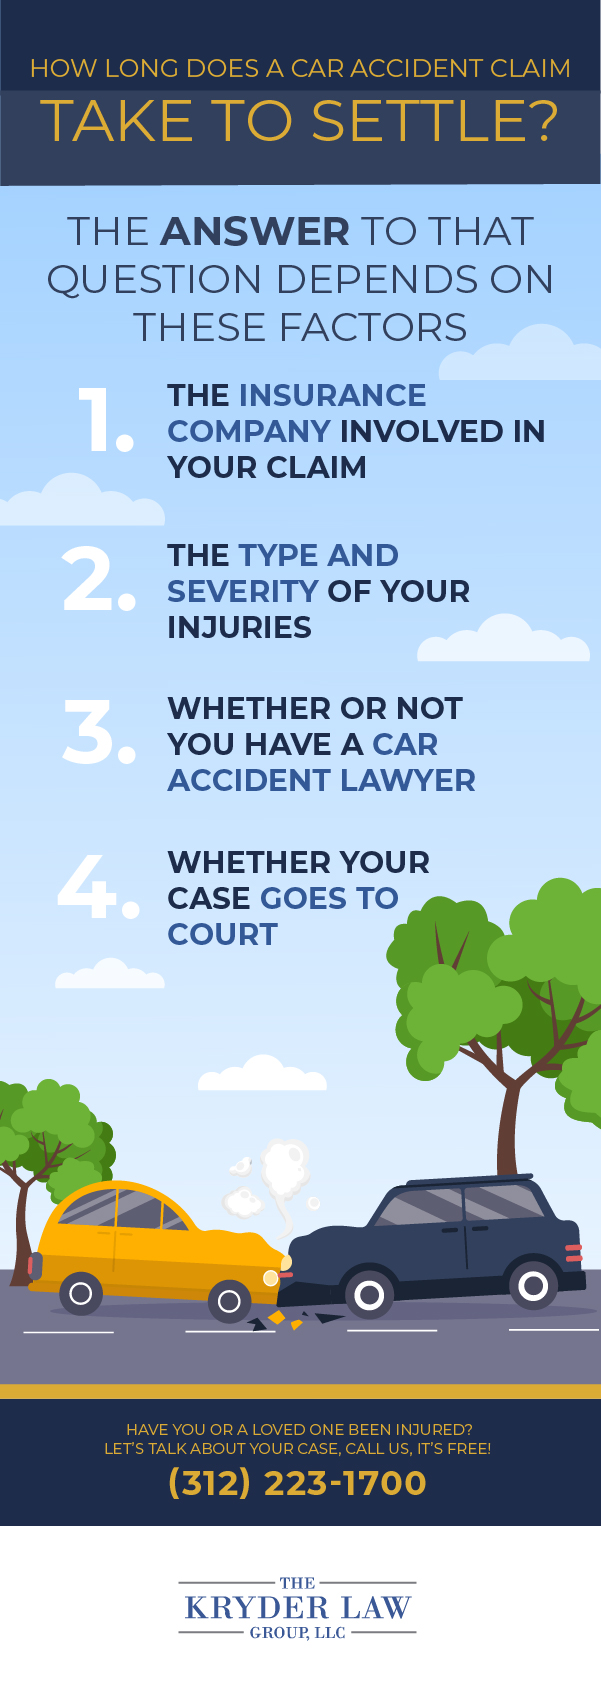 How Long Does a Car Accident Claim Take to Settle Infographic